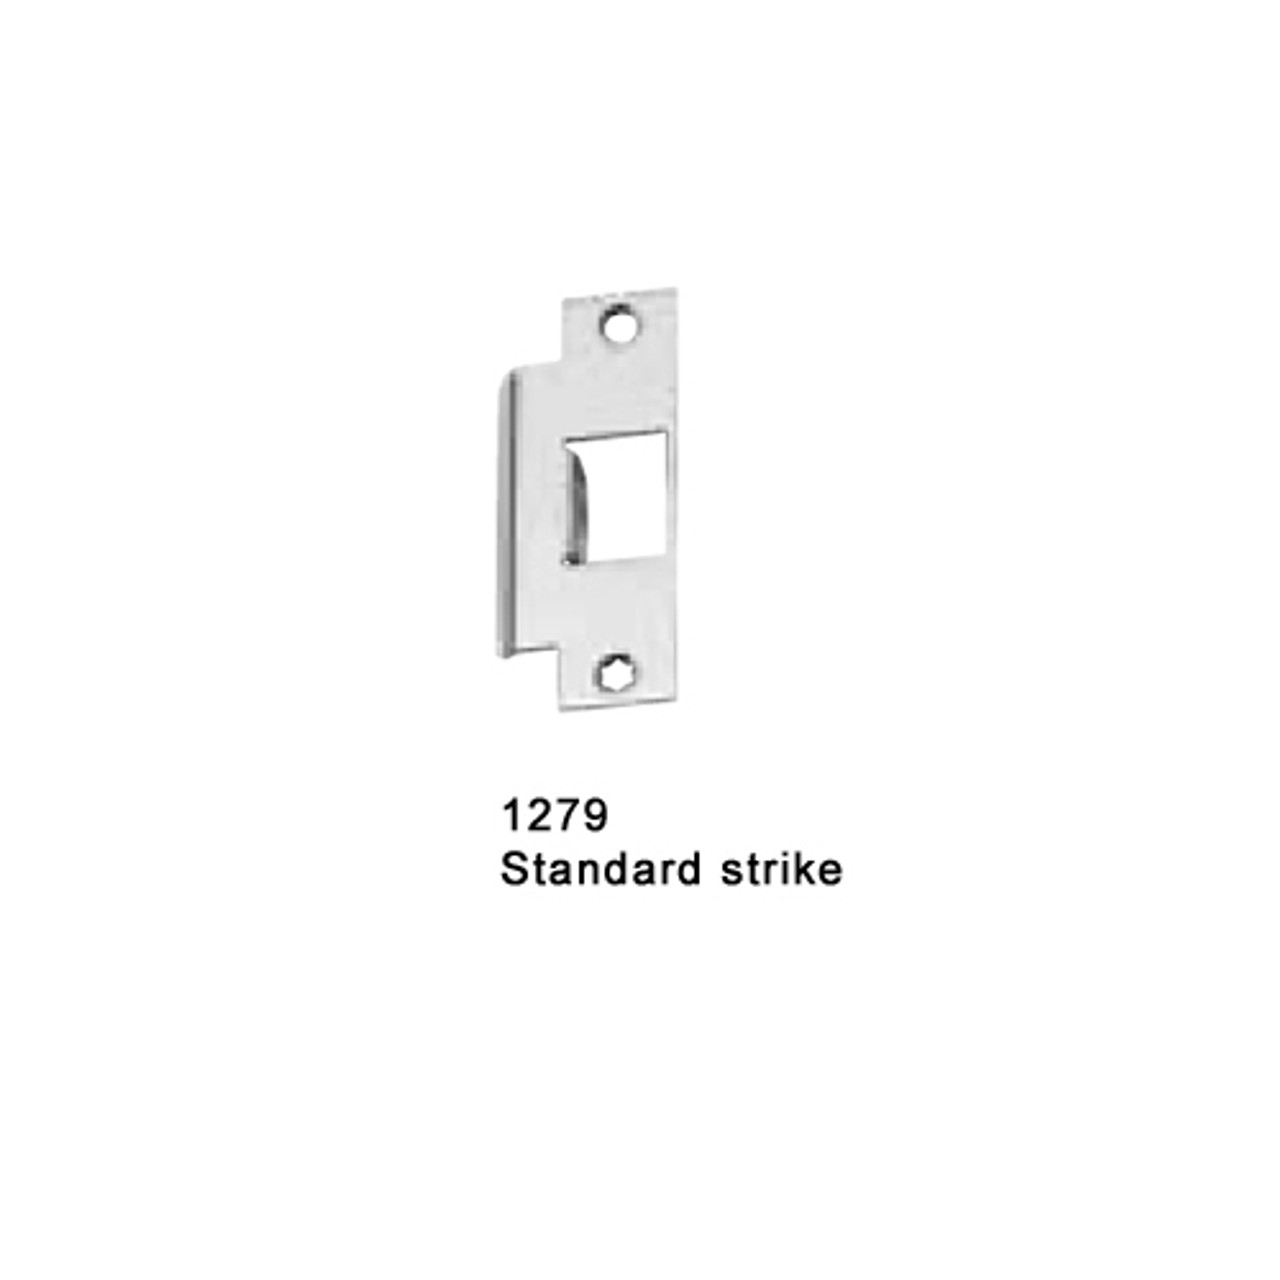 F-25-M-L-Dane-US26-4-RHR Falcon 25 Series Fire Rated Mortise Lock Devices with 510L Dane Lever Trim in Polished Chrome